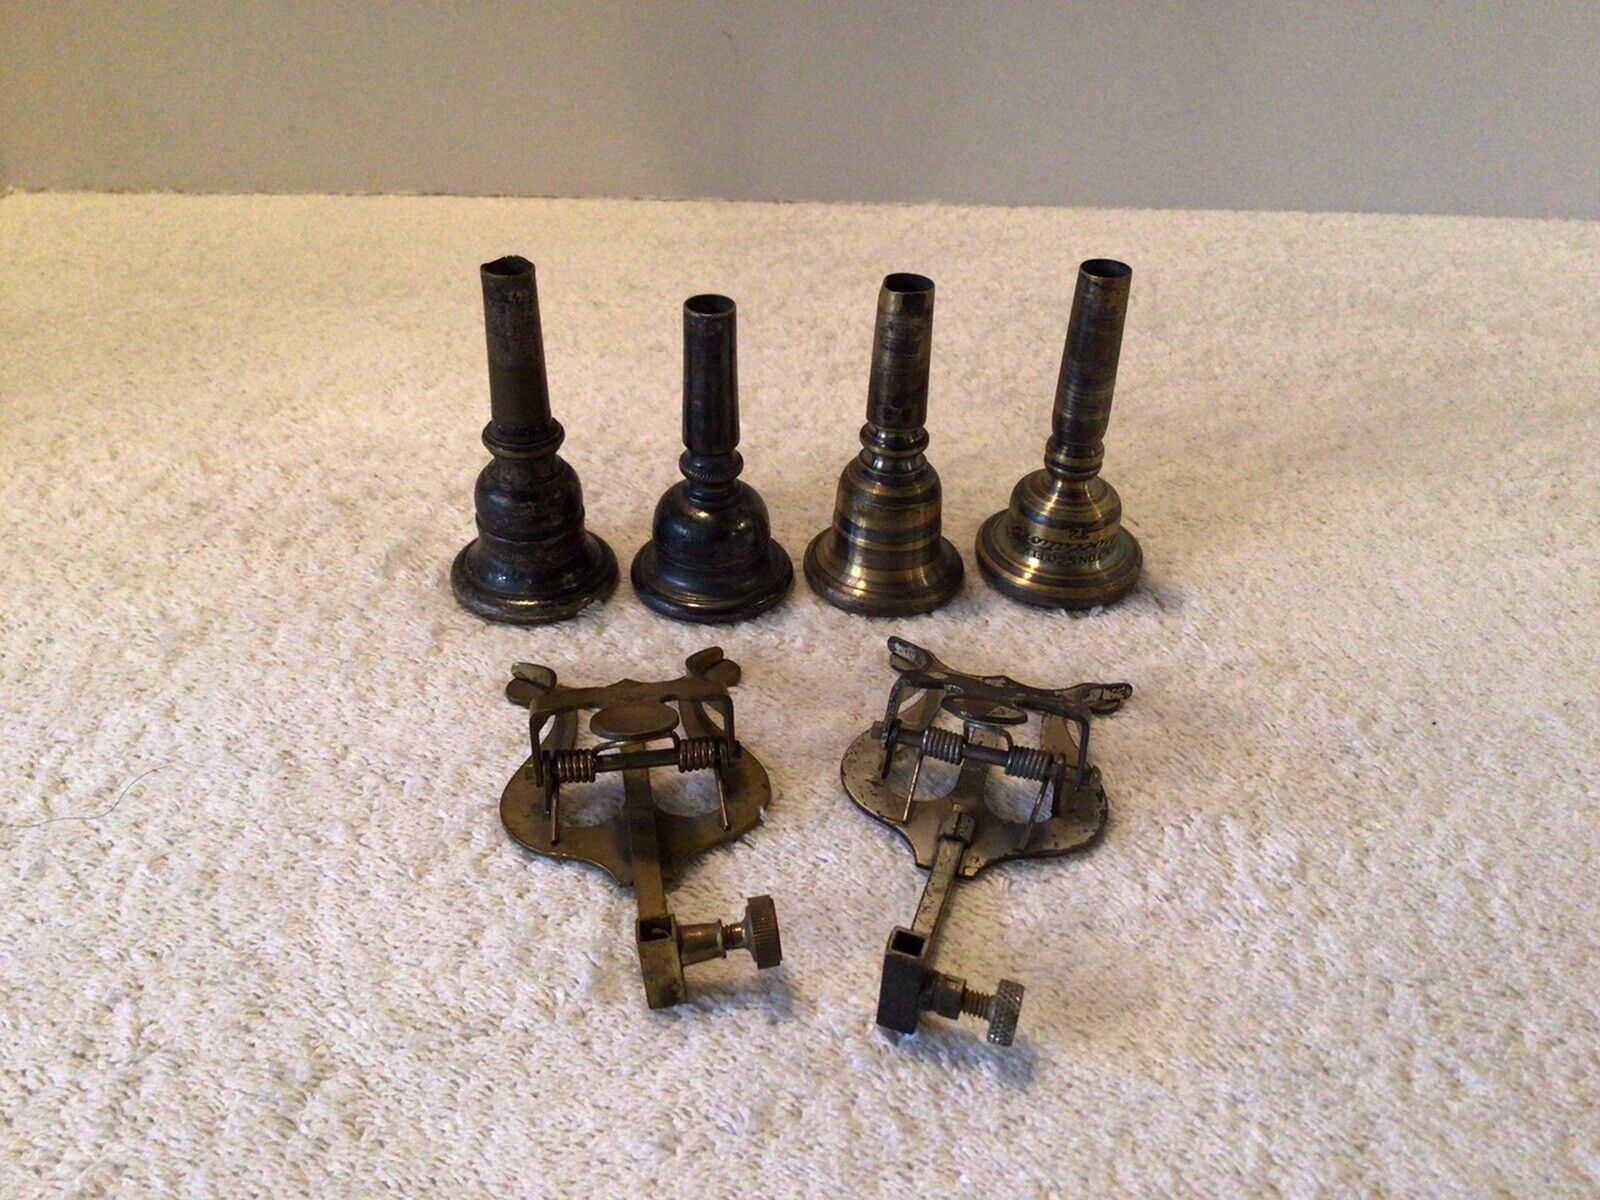 4 VINTAGE *FRANK HOLTON* H.M. WHITE TRUMPET HORN MOUTH PIECES MUSIC HOLDERS Popularność 2022